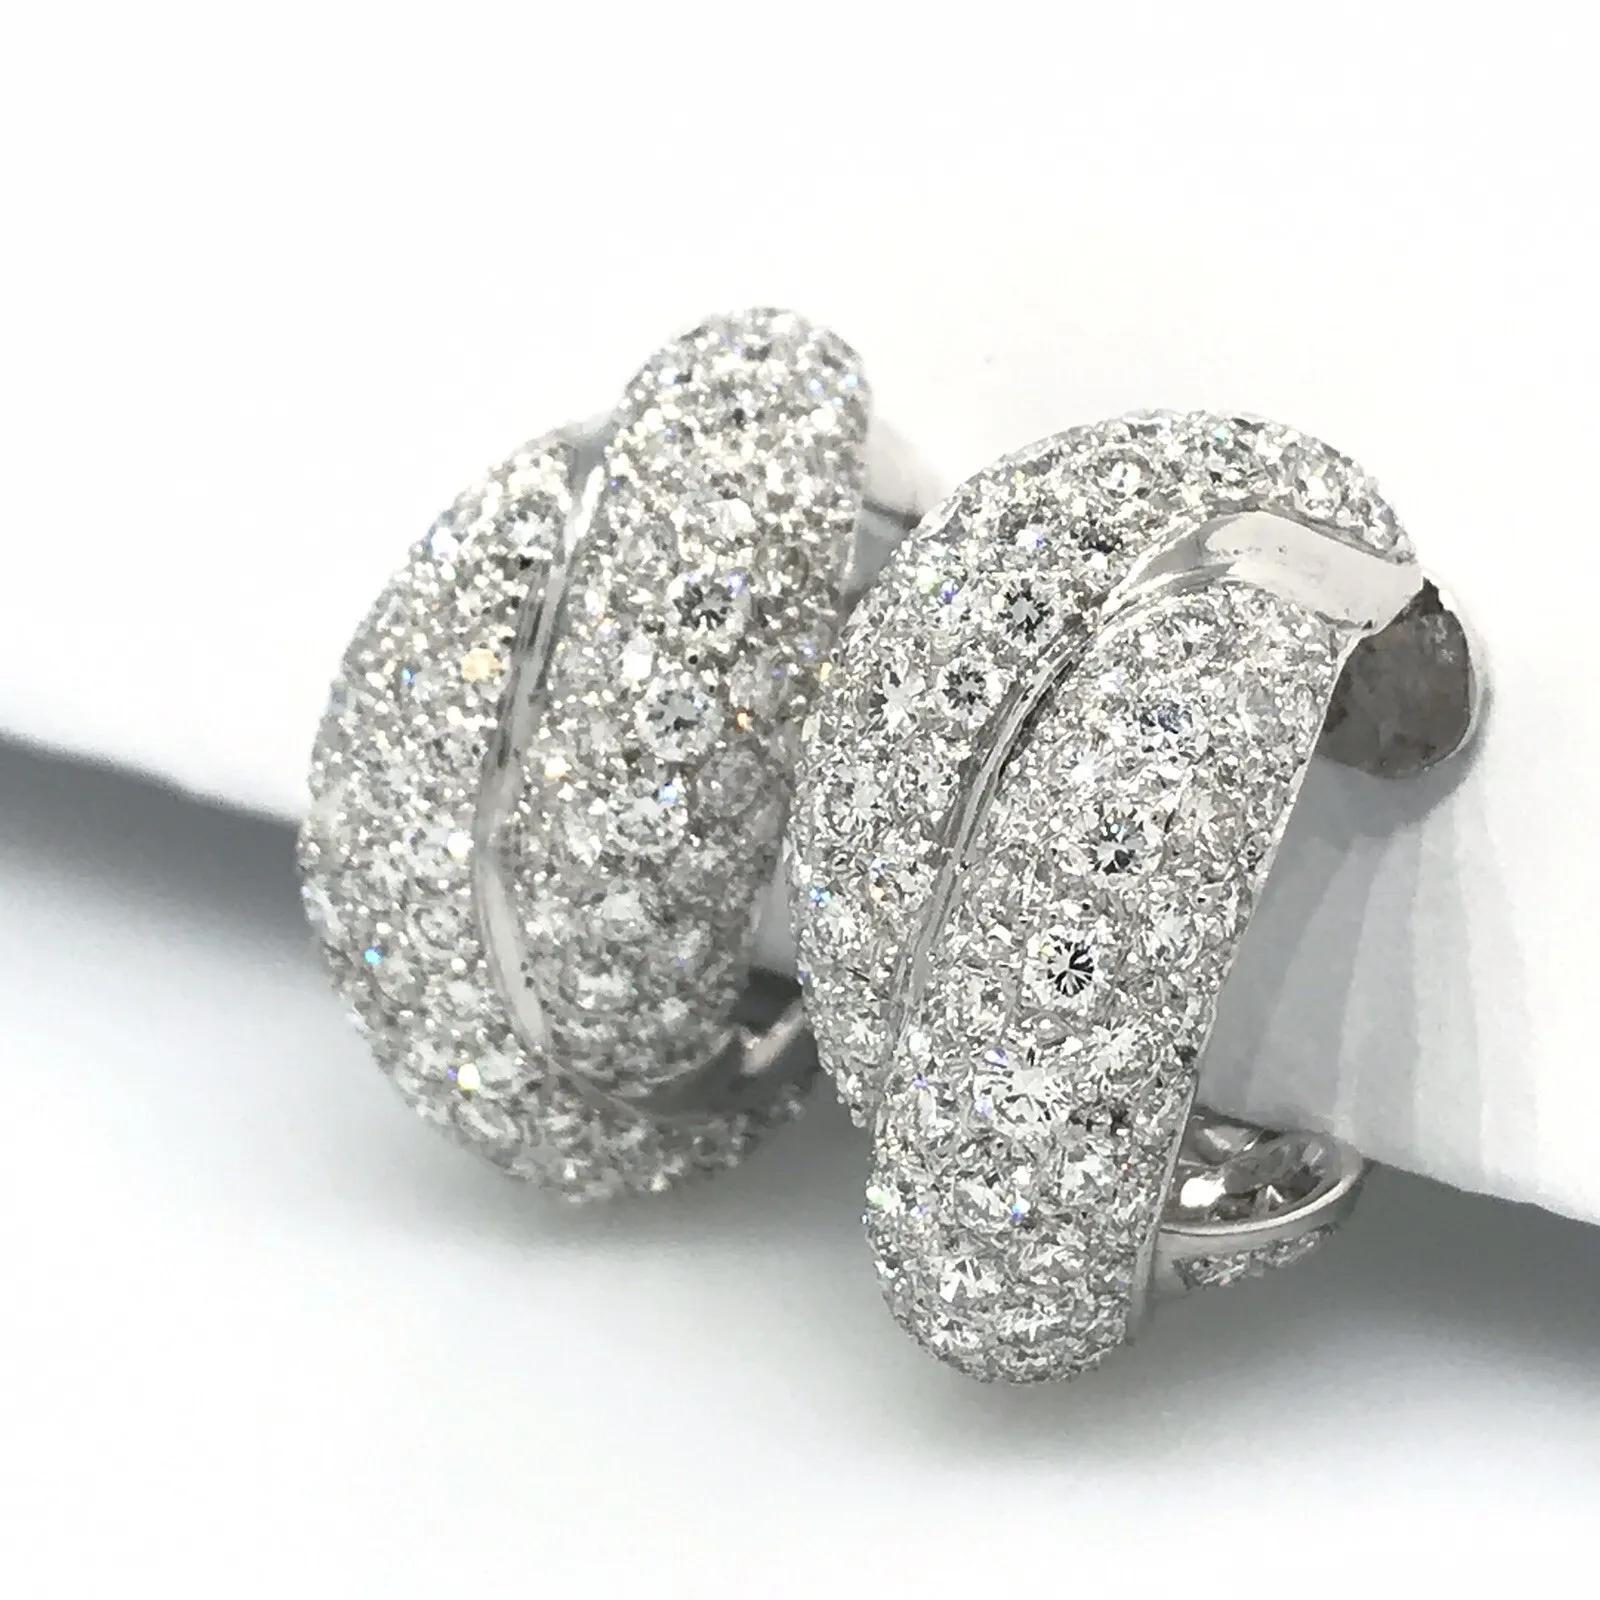 French Pavé Diamond Twist Earrings 4.48 carat in 18k White Gold In Excellent Condition For Sale In La Jolla, CA